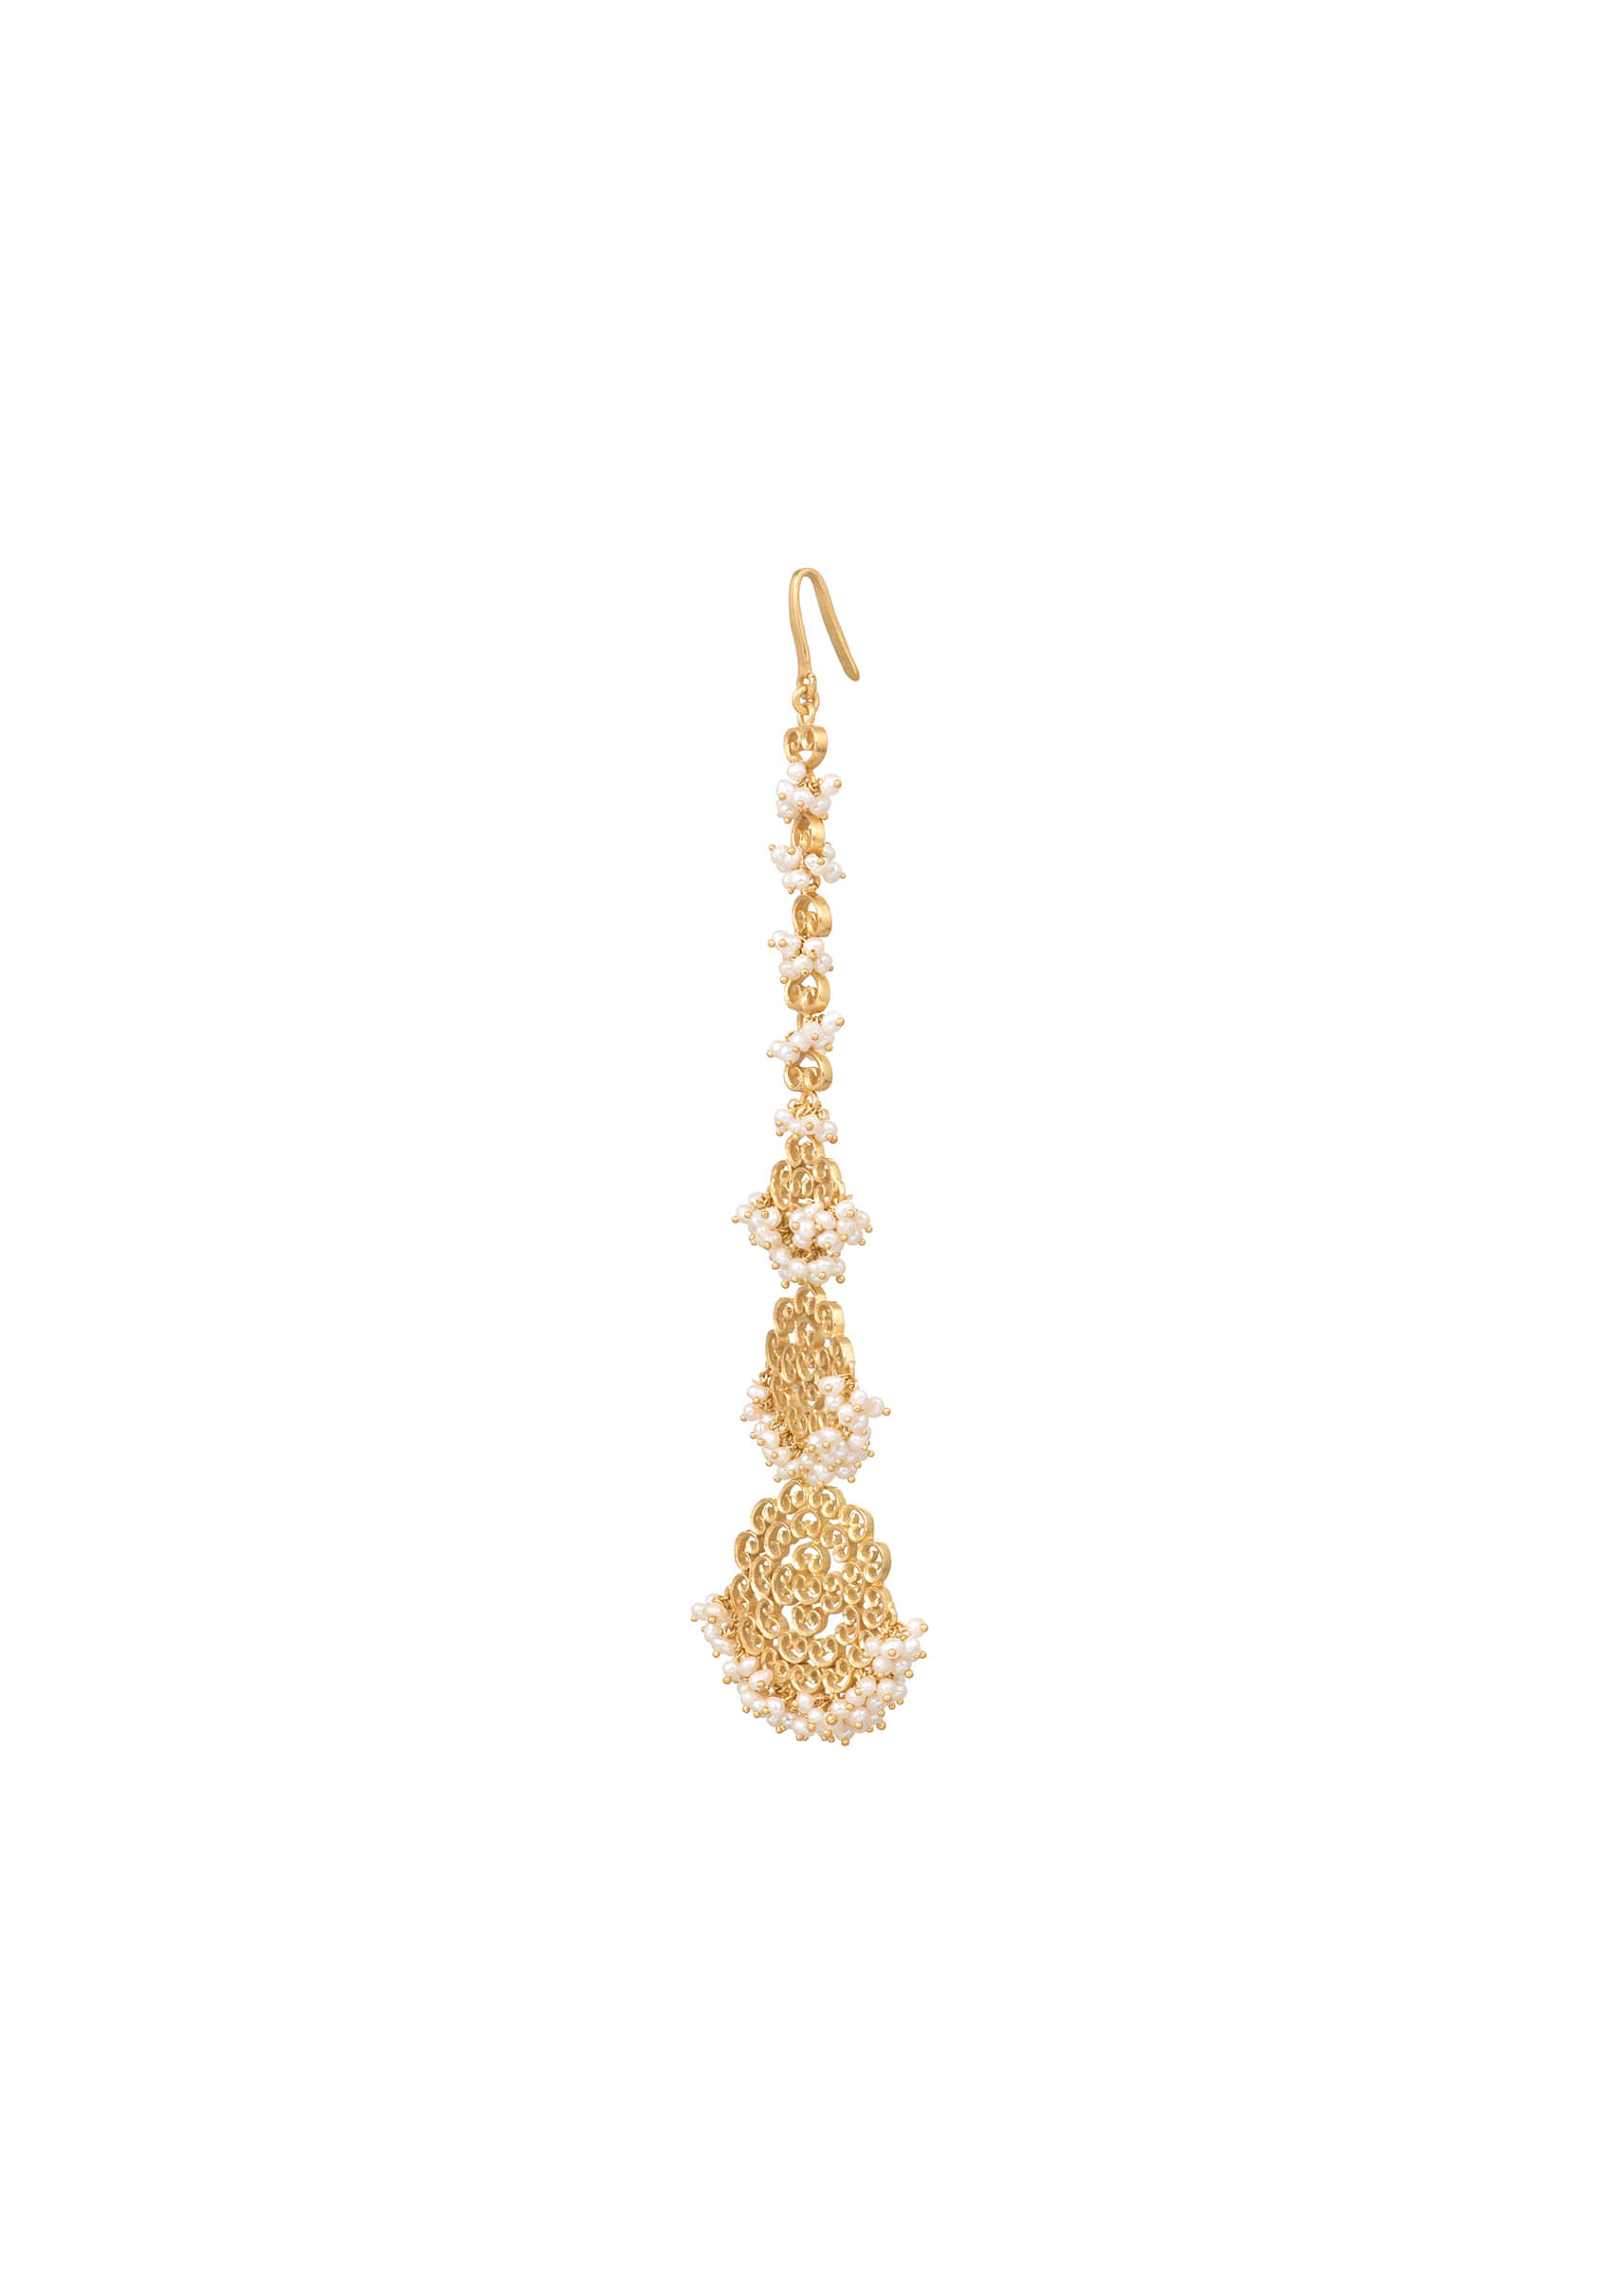 Gold Plated Maang Tika With Delicate Filigree Carvings And Dreamy Pearls By Zariin